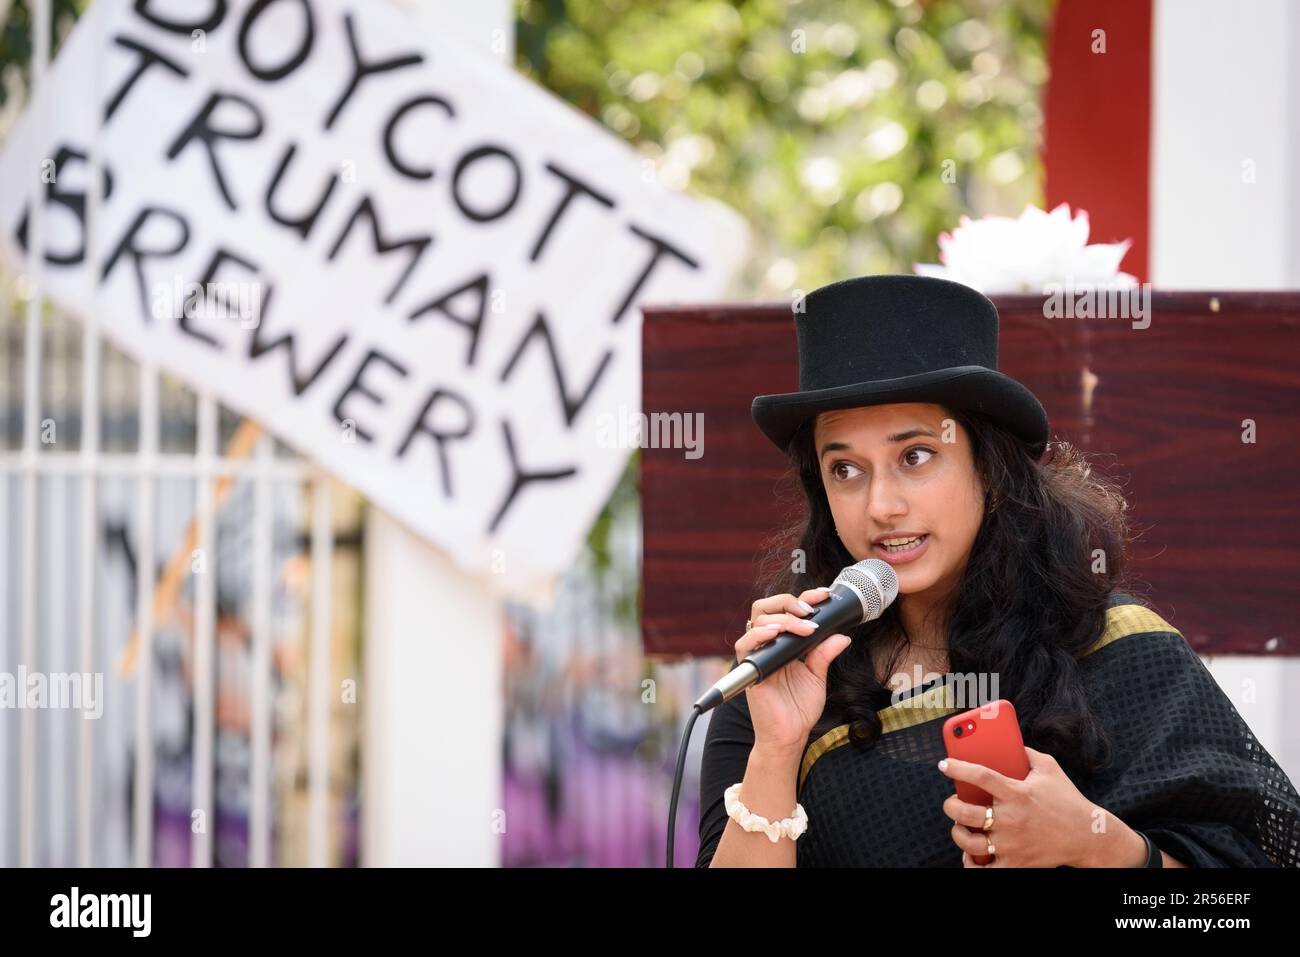 A community activist addresses a rally in Altab Ali Park against plans to build shops and offices on the Truman Brewery site in Brick Lane, London. Stock Photo